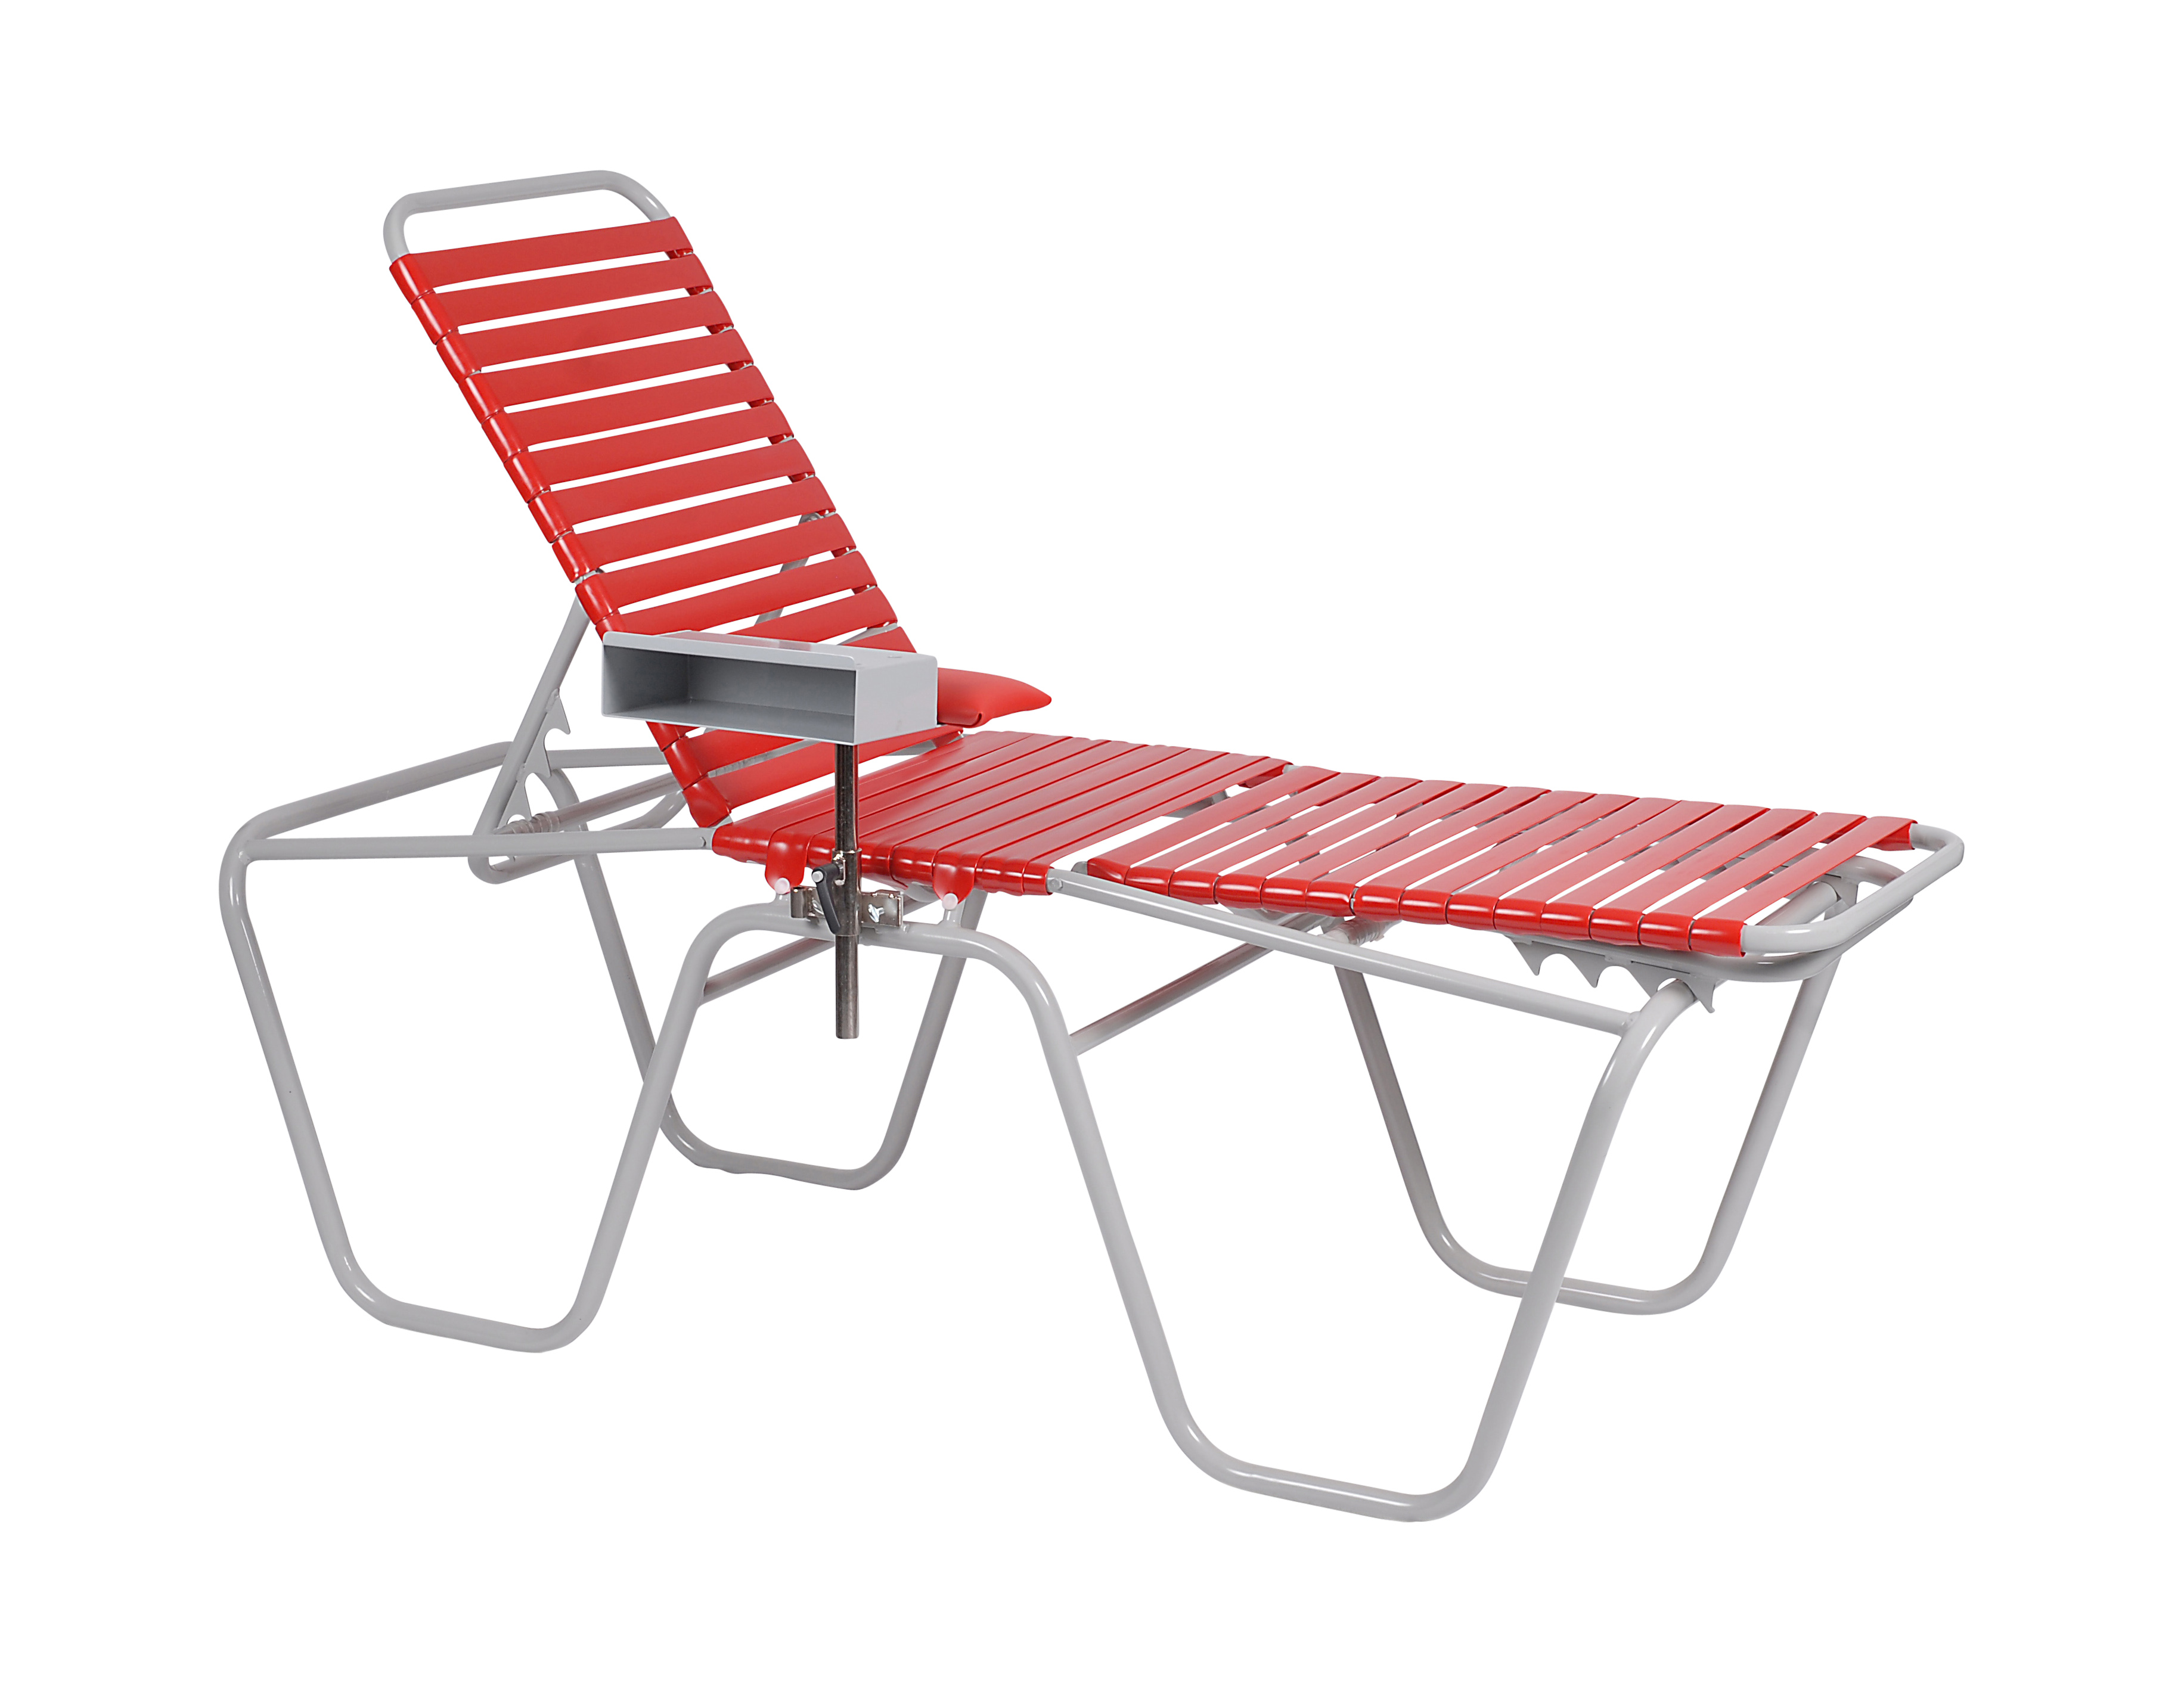 Portable Donor Bed - Red/Grey 